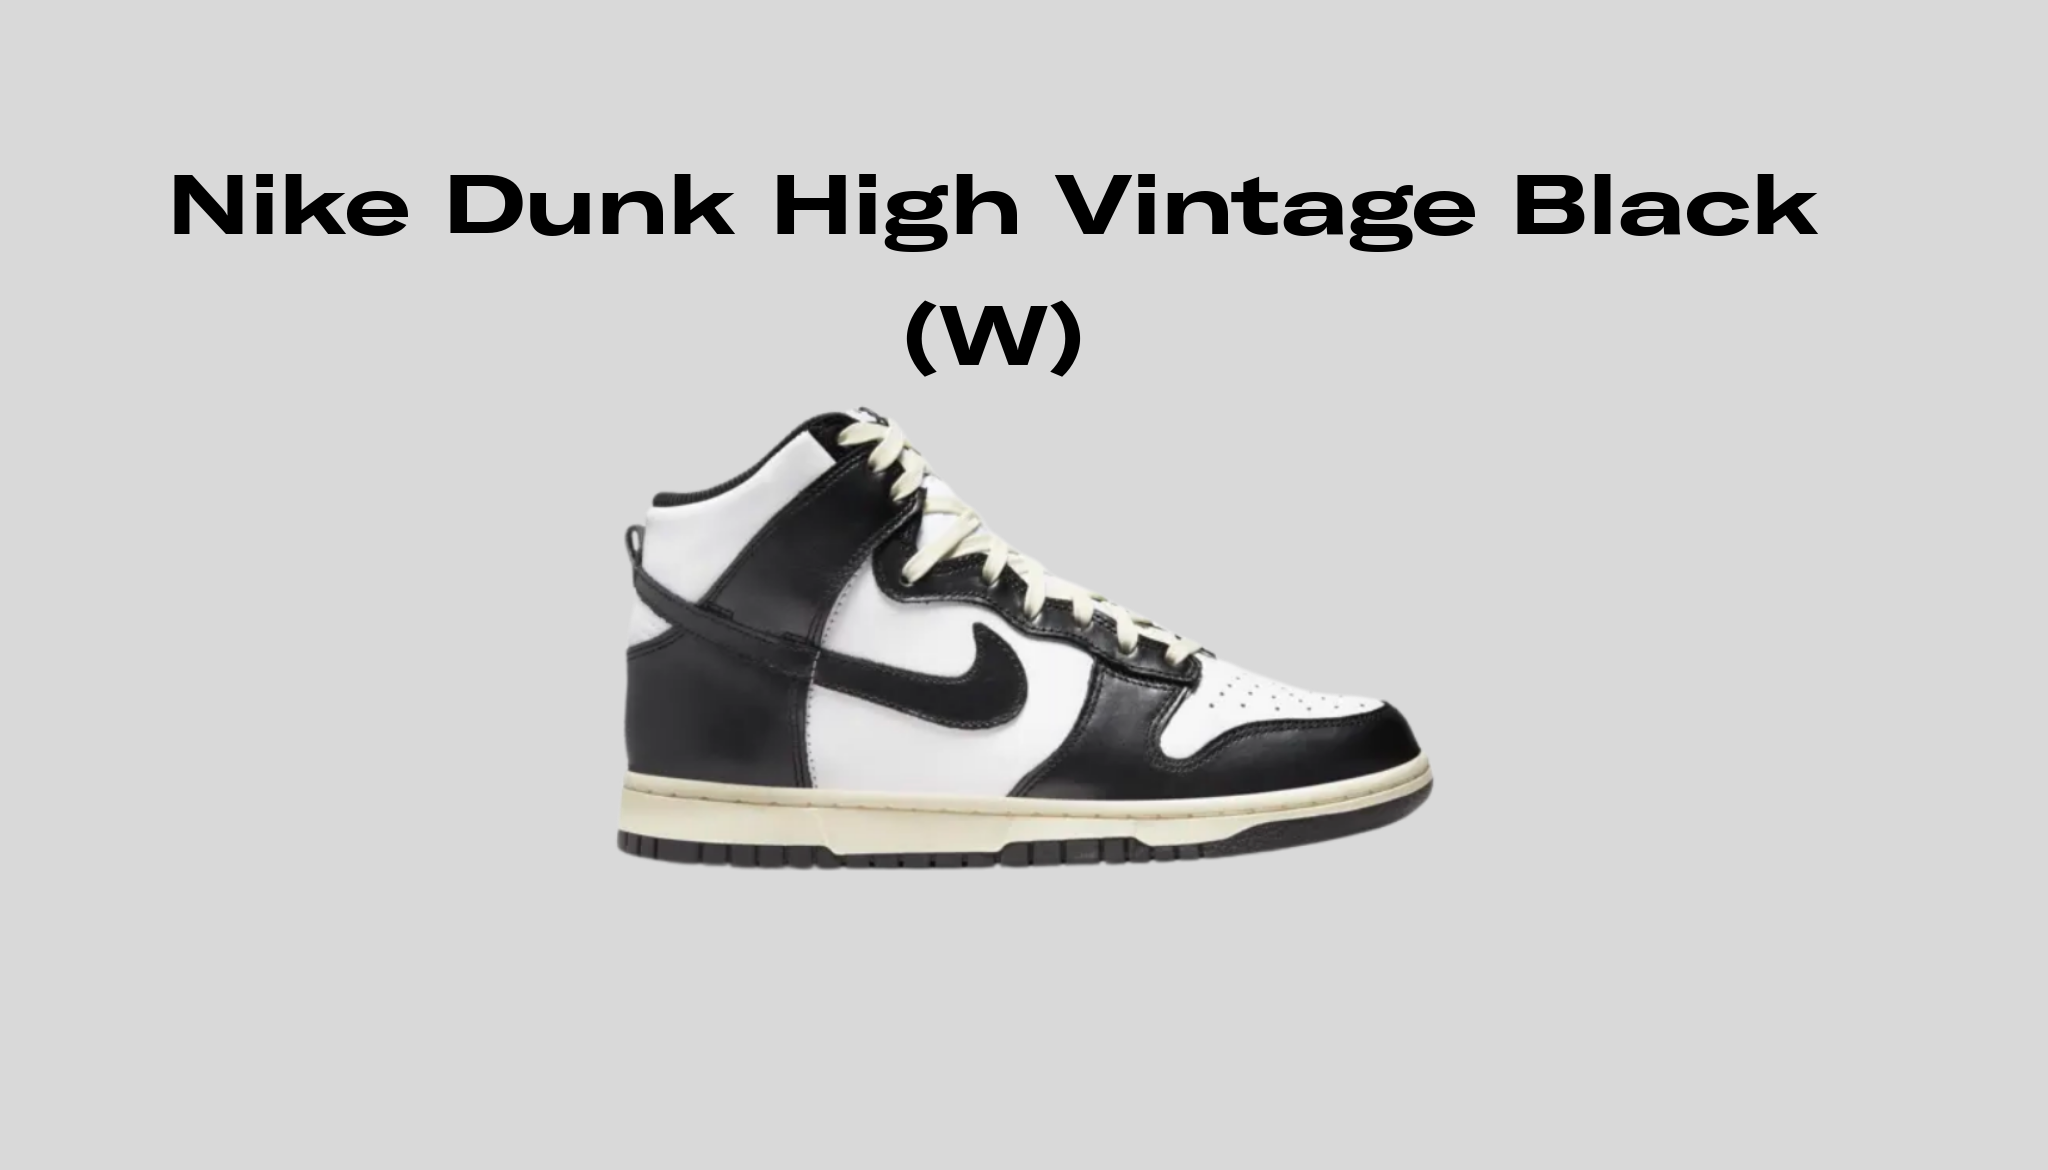 Nike Dunk High Vintage Black (W), Raffles and Release Date | Sole Retriever